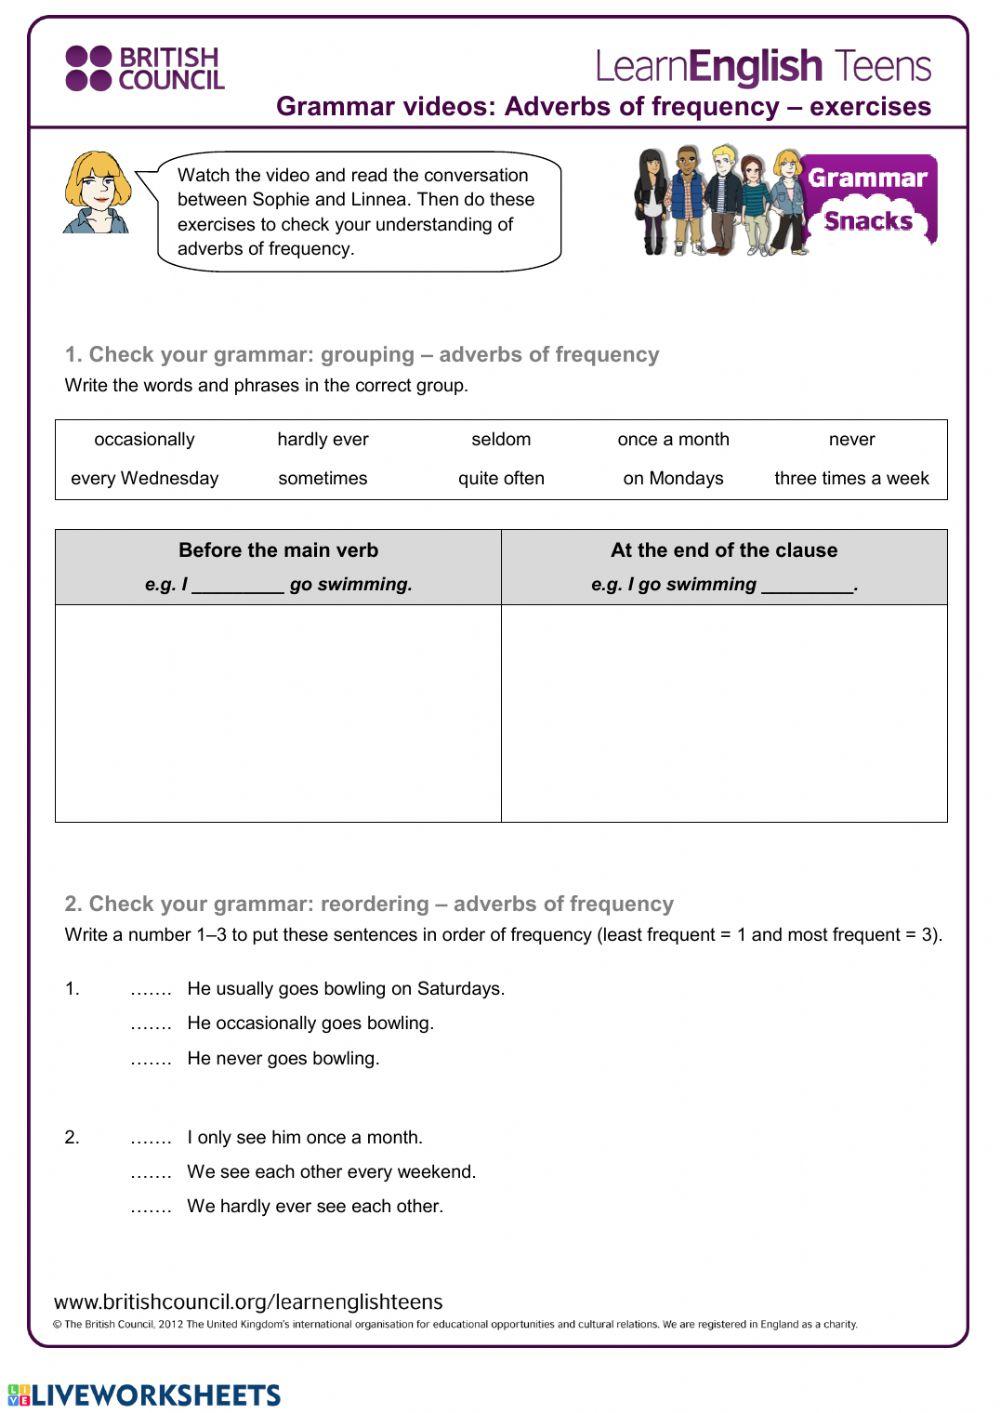 adverbs-of-frequency-british-council-worksheet-live-worksheets